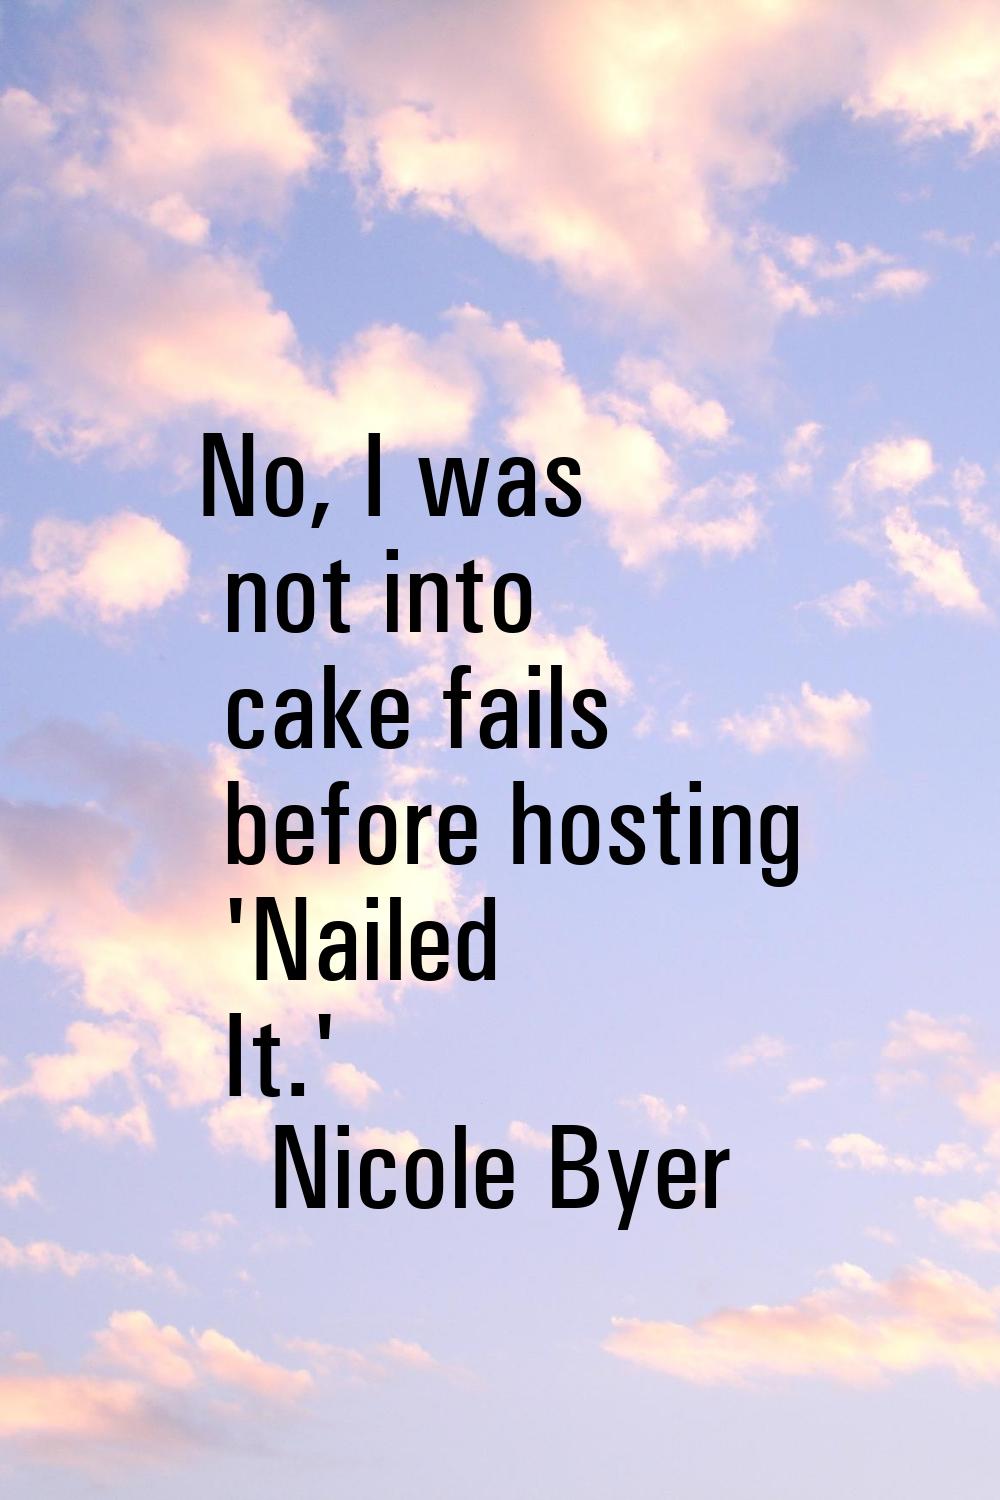 No, I was not into cake fails before hosting 'Nailed It.'